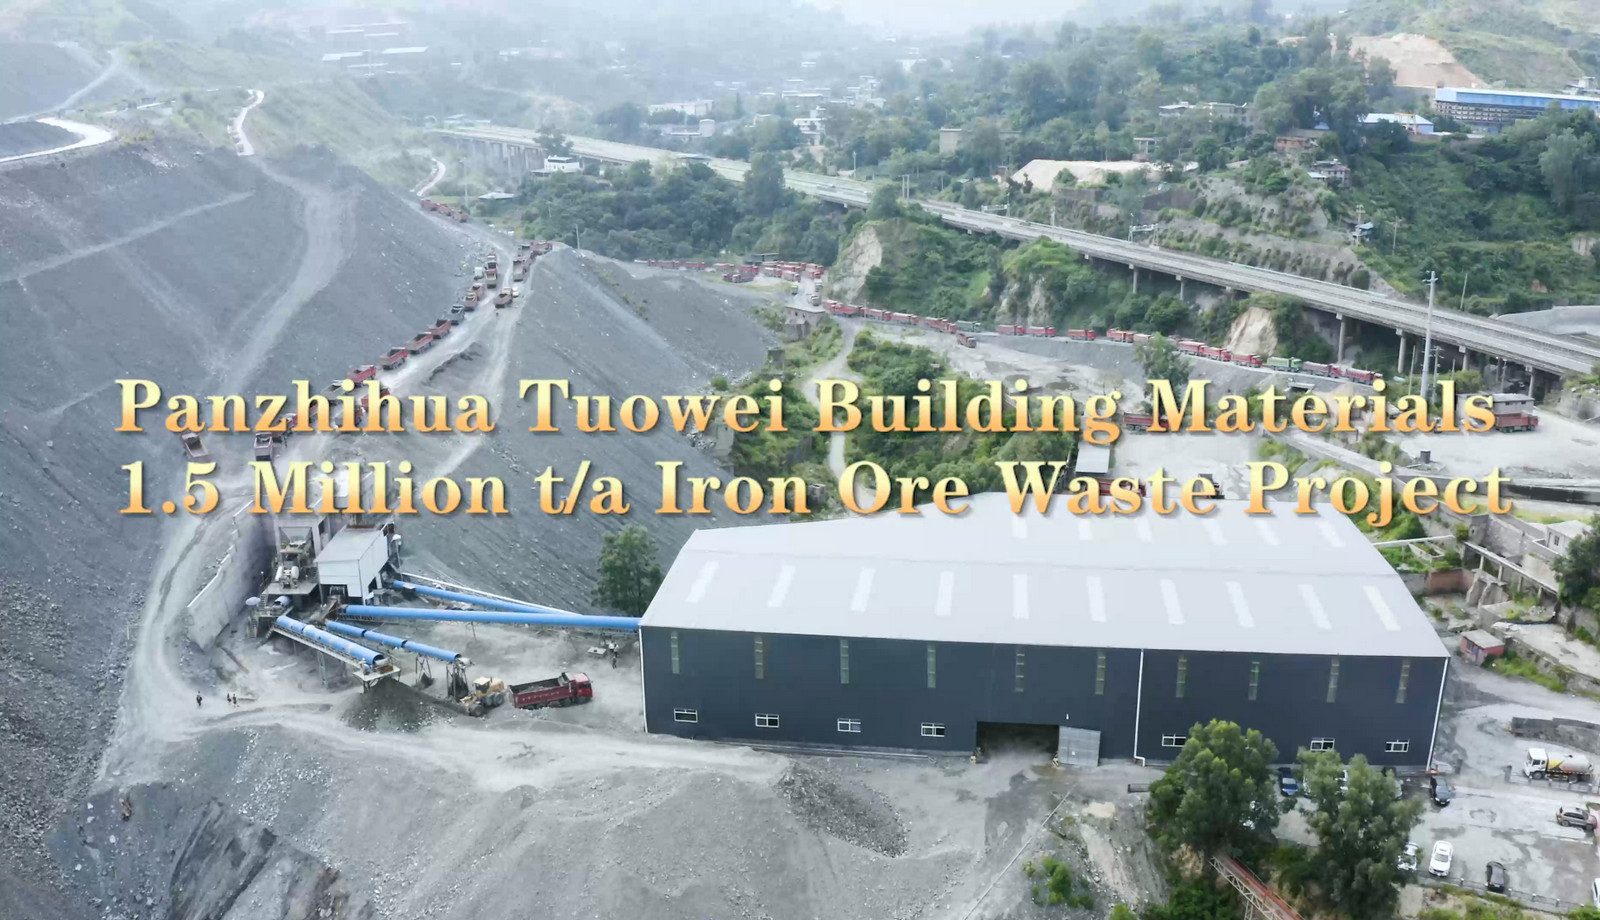 Panzhihua Tuowei Building Materials 1.5 Million t/a Iron Ore Waste Project